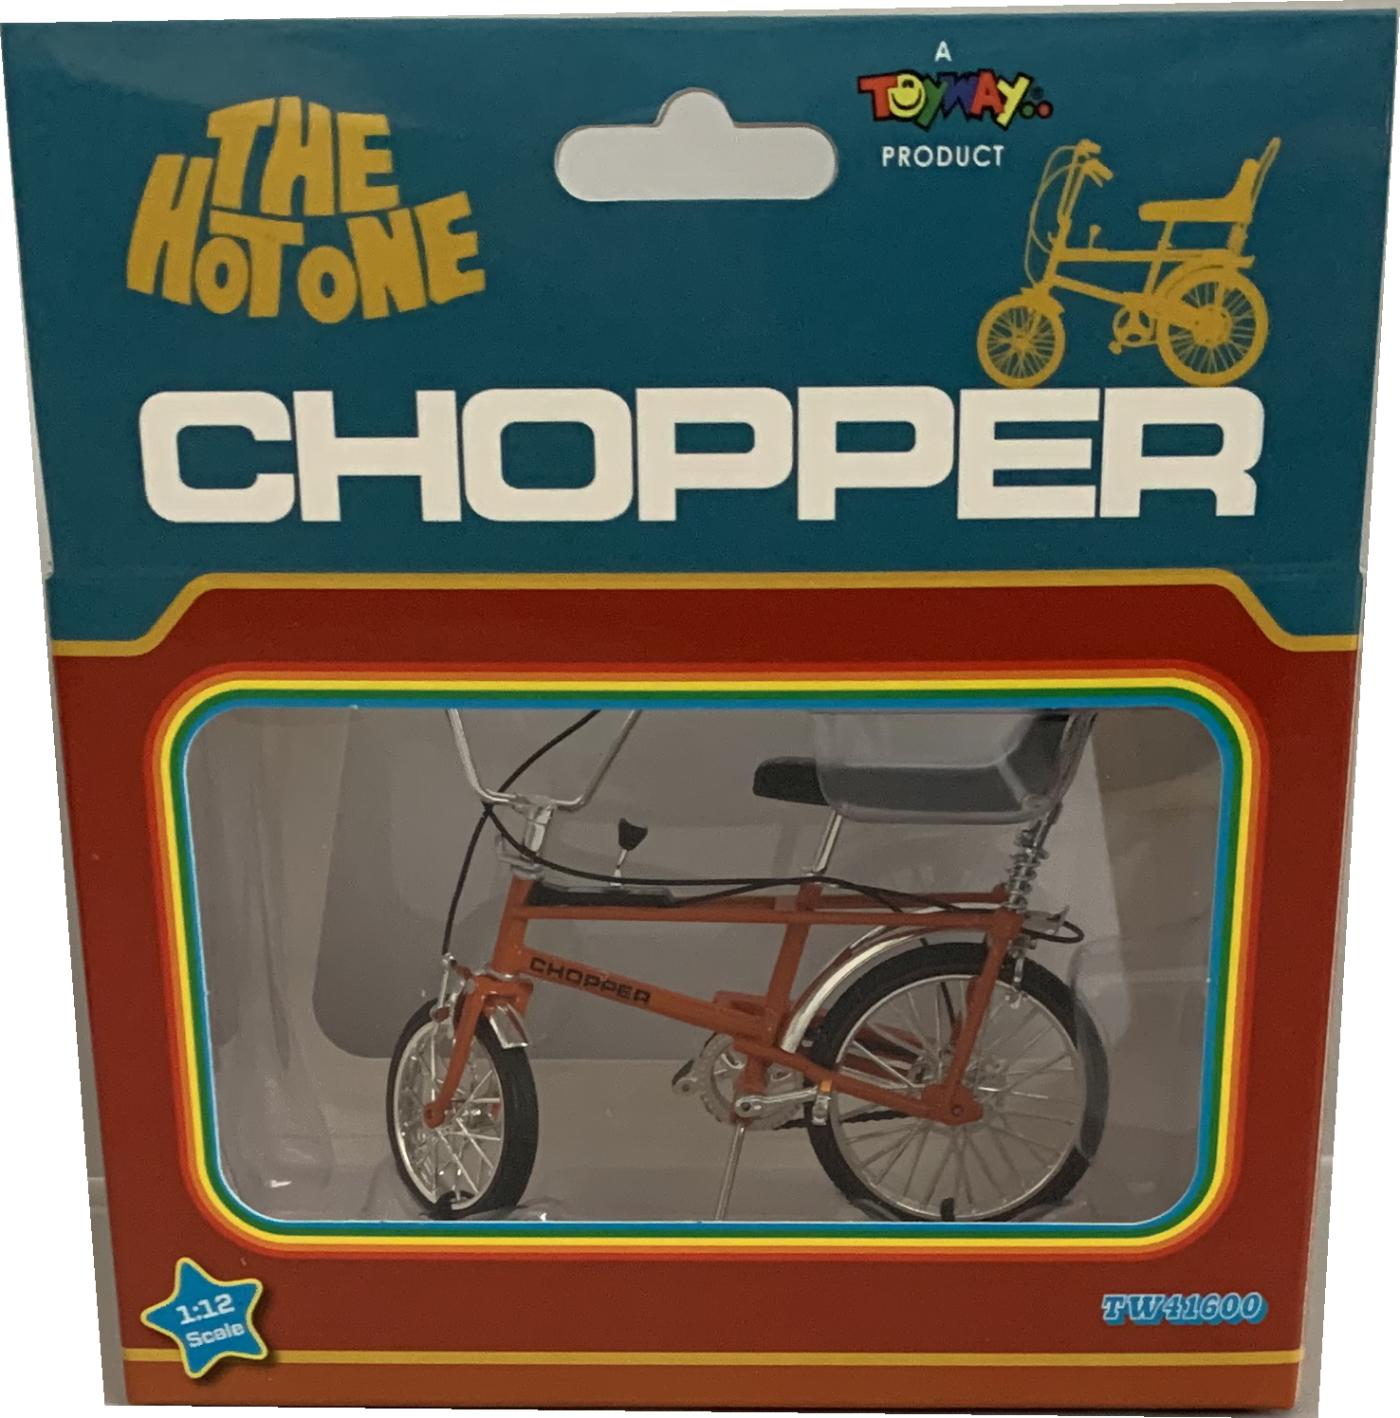 Chopper mk1 Classic 1970’s Bicycle in Orange 1:12 scale model from Toyway